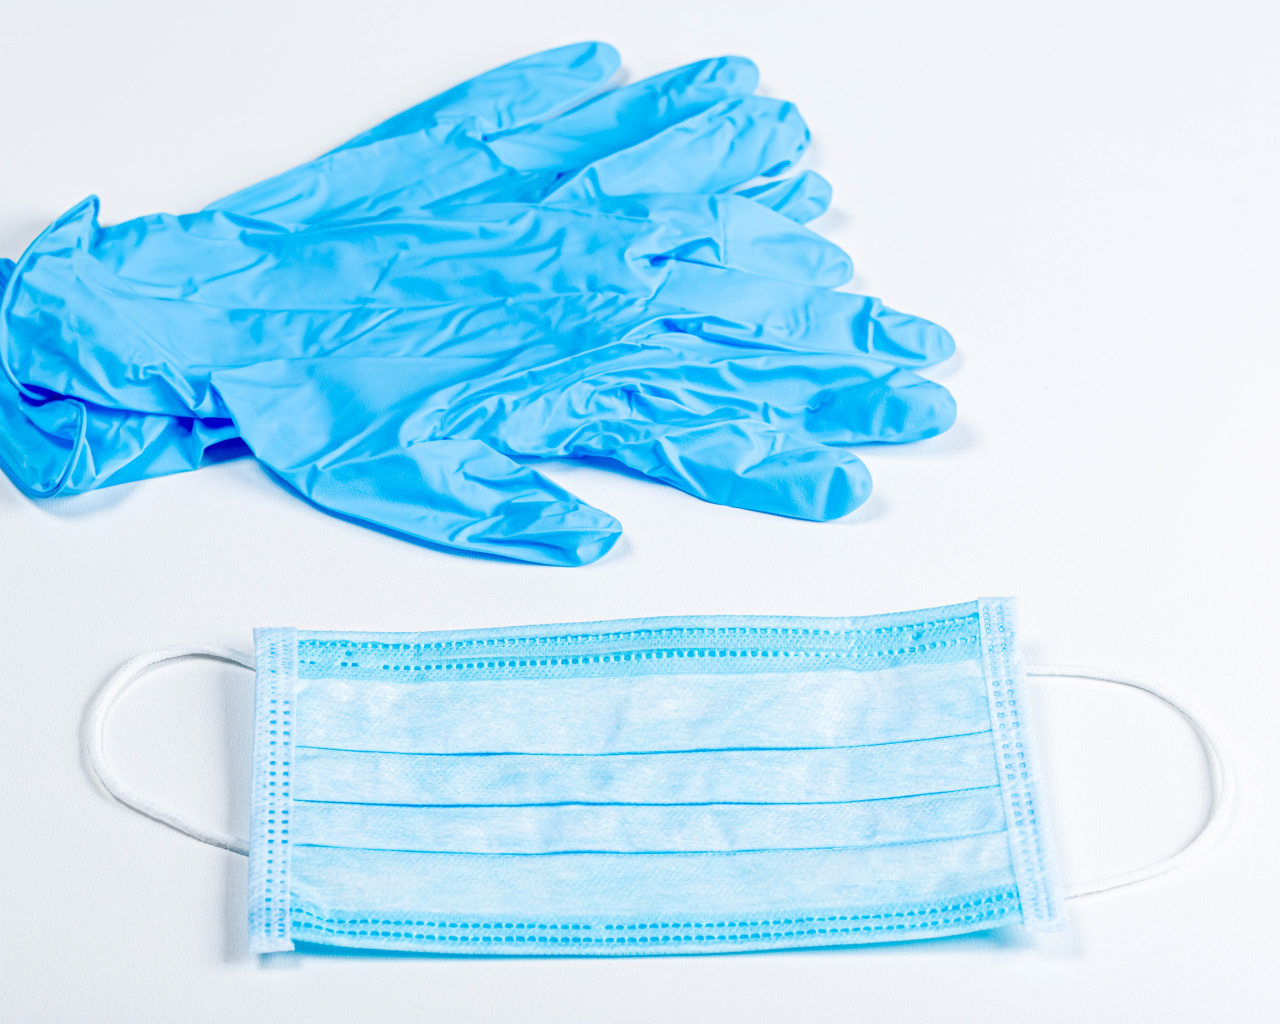 Blue gloves and face mask on a white background from coronavirus